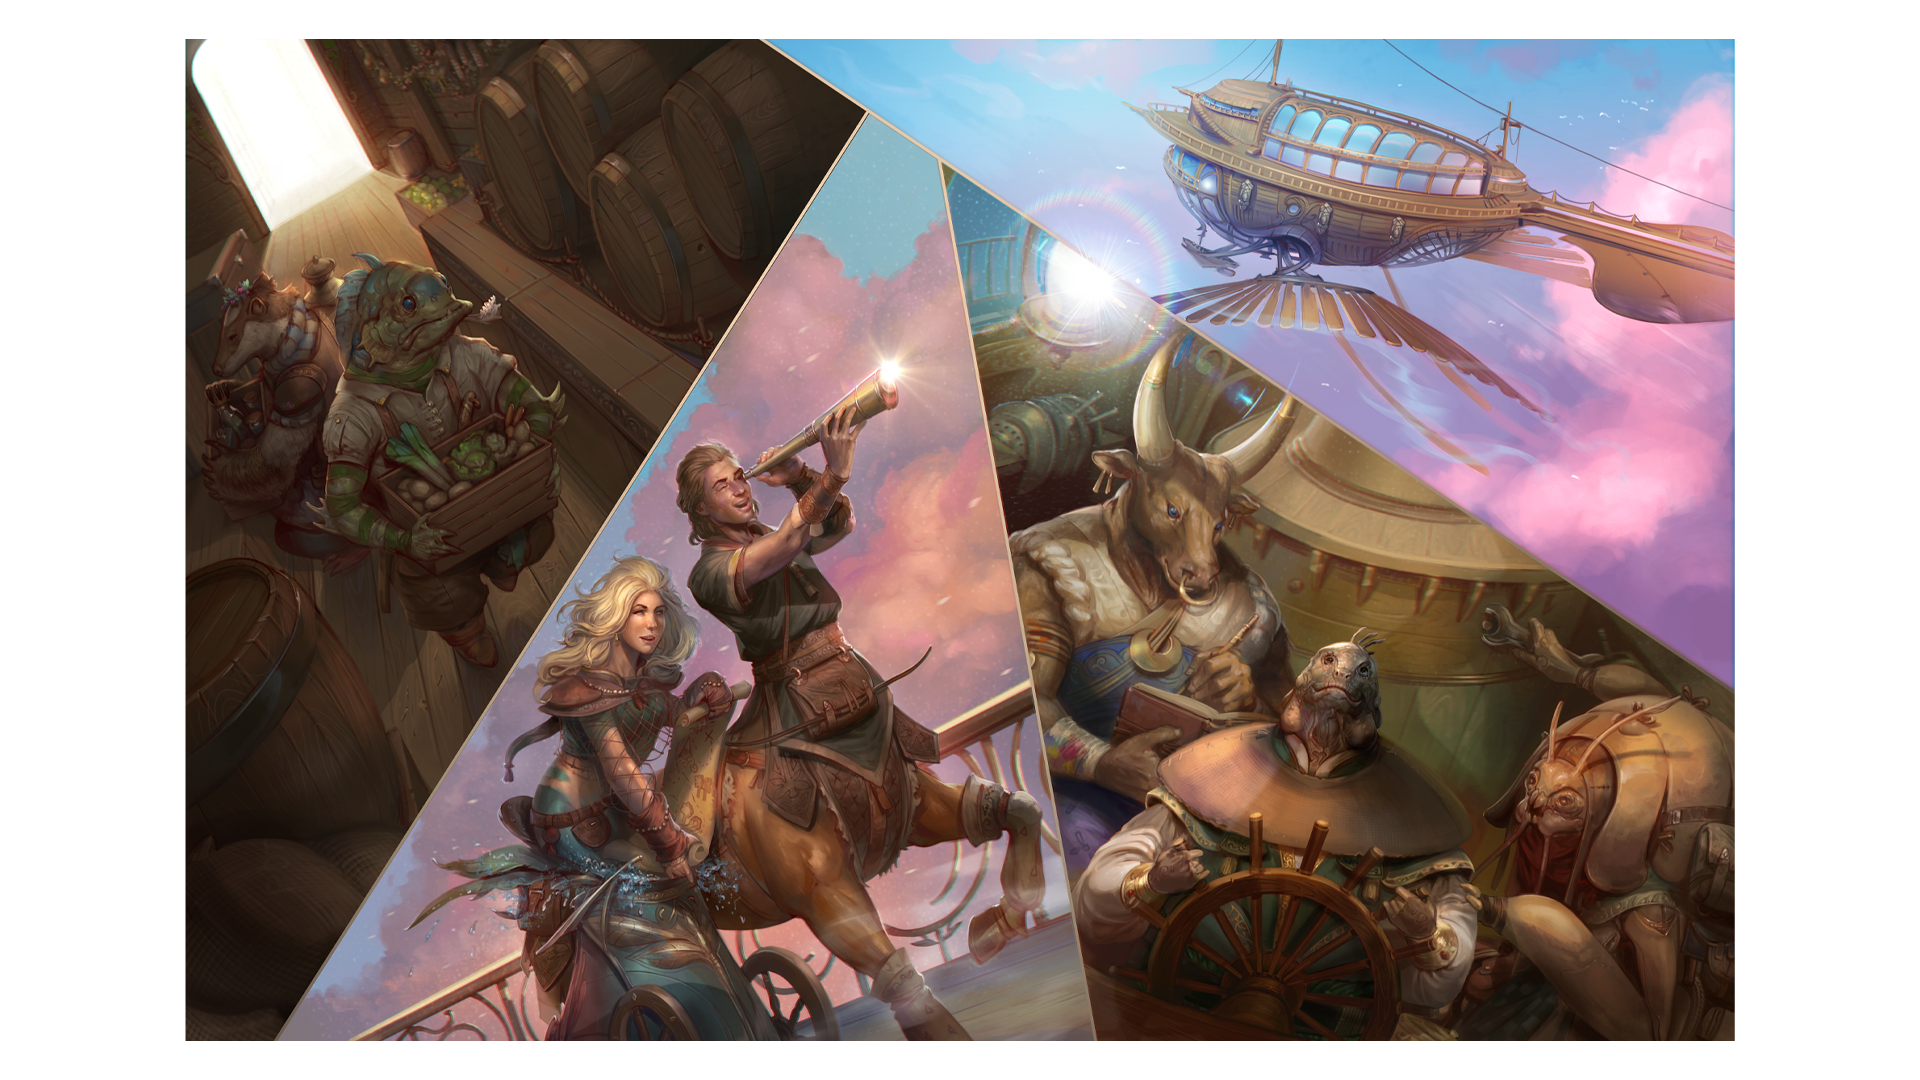 A composite image of scenes from Pathfinder Howl of the Wild, featuring the Zoetrope airship, the naturalist and his crew, and art of the new centaur and minotaur ancestries.